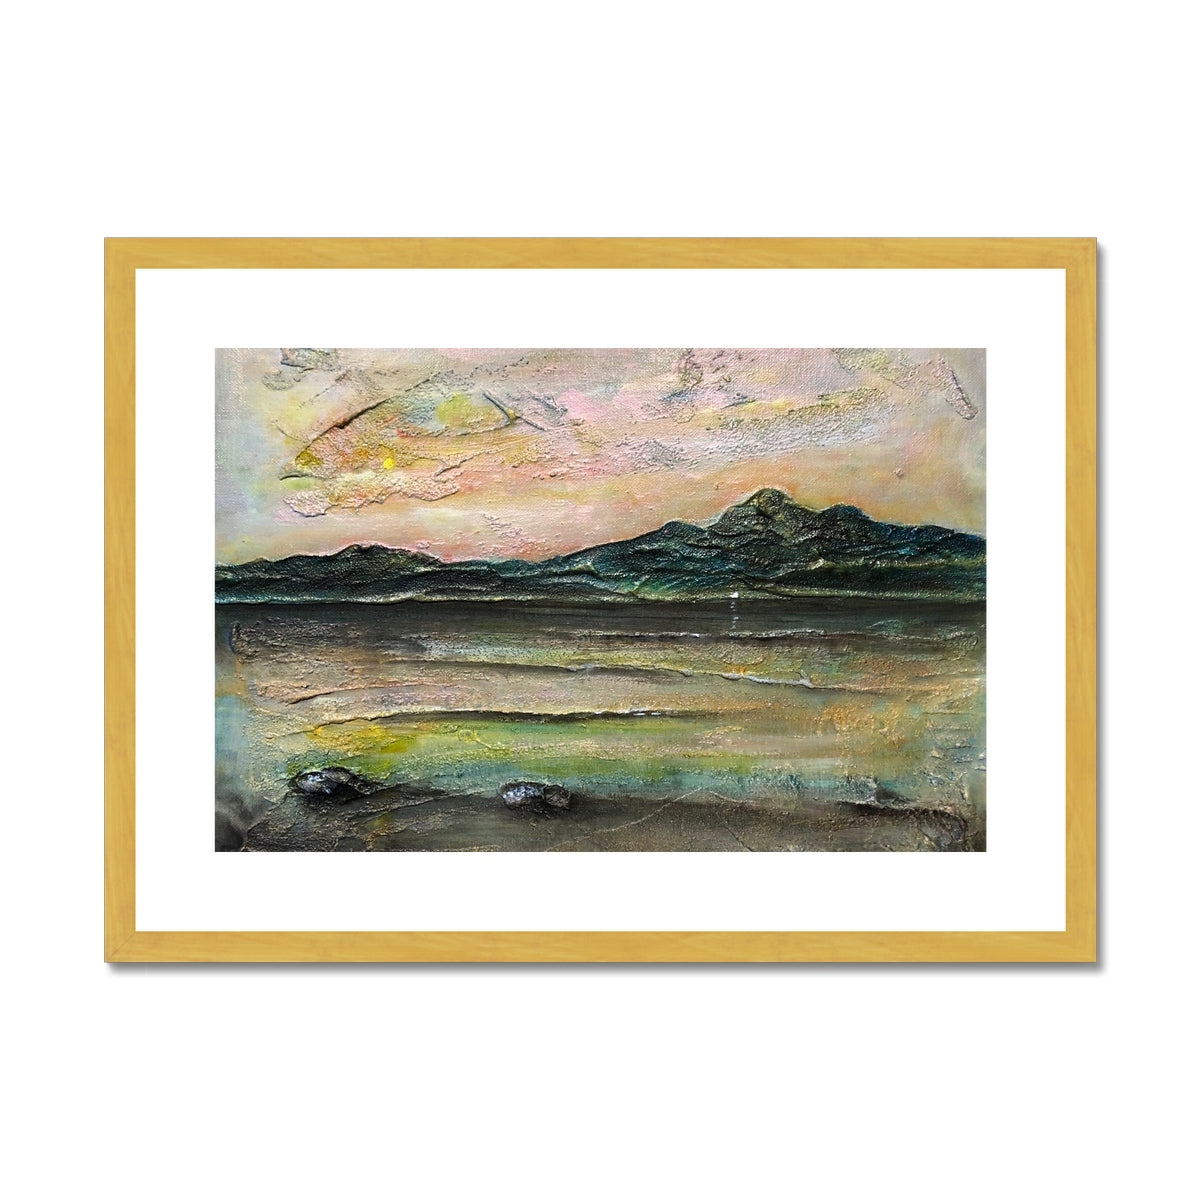 An Ethereal Loch Na Dal Skye Painting | Antique Framed & Mounted Prints From Scotland-Antique Framed & Mounted Prints-Scottish Lochs & Mountains Art Gallery-A2 Landscape-Gold Frame-Paintings, Prints, Homeware, Art Gifts From Scotland By Scottish Artist Kevin Hunter